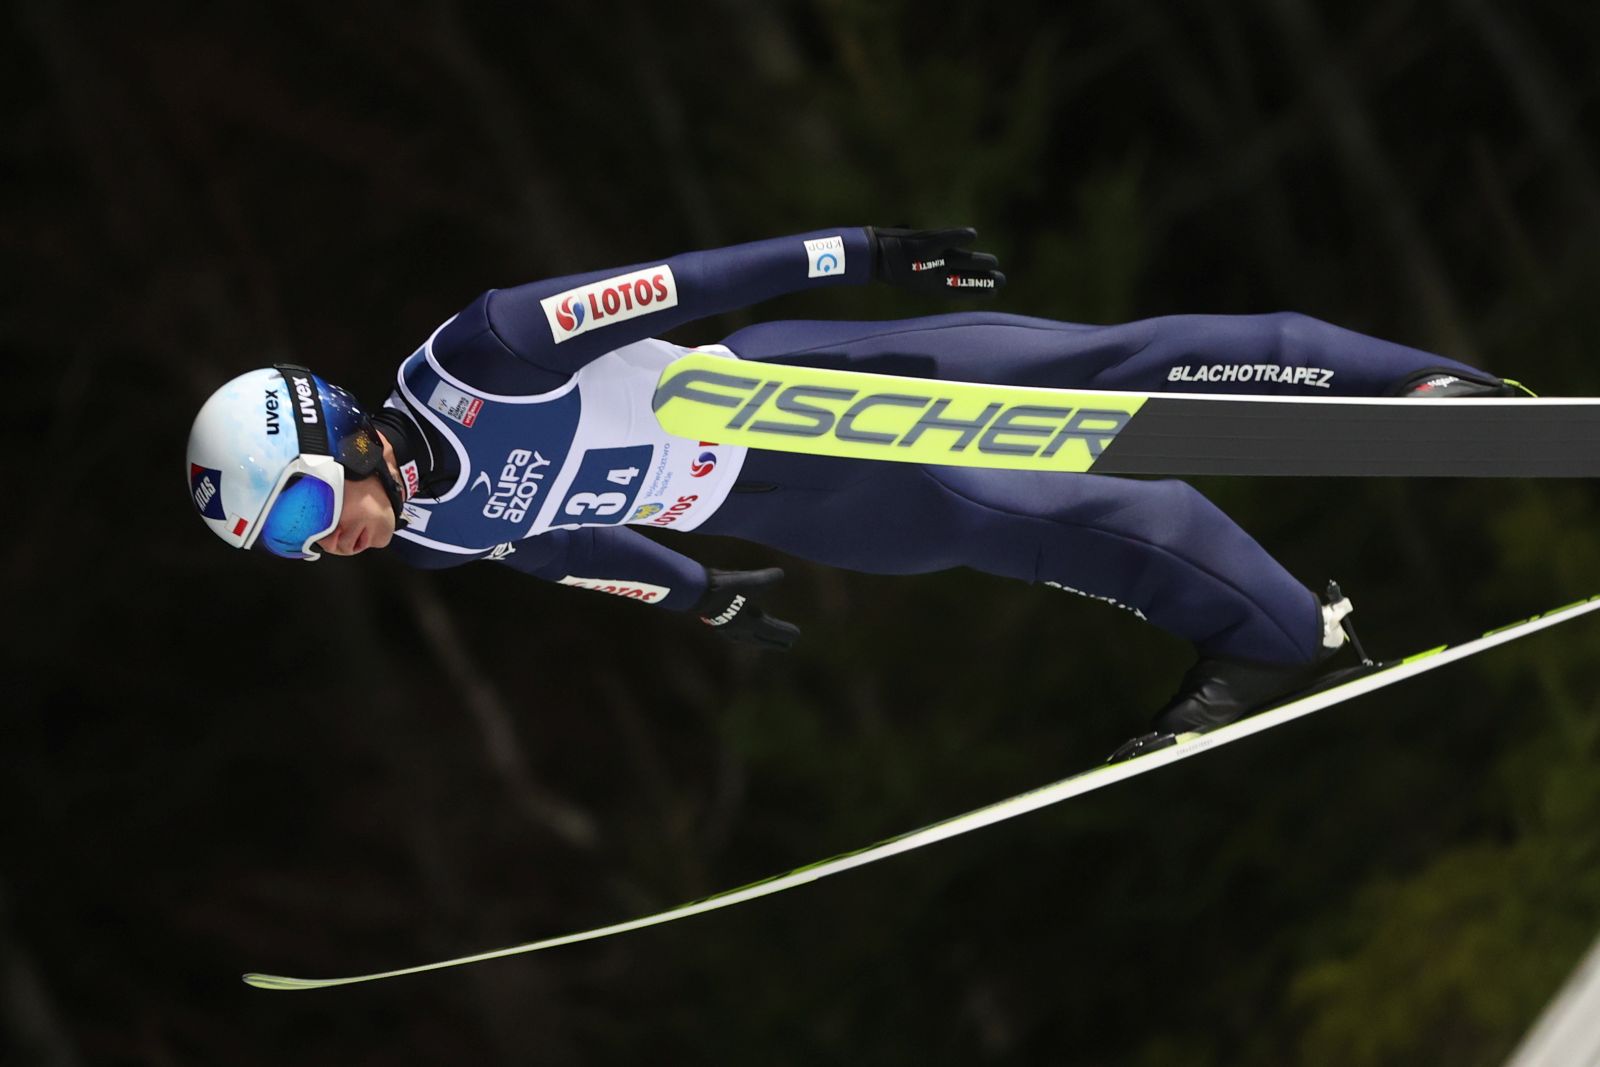 epa09621417 Kamil Stoch of Poland in action during the team competition of the FIS Ski Jumping World Cup at the Adam Malysz Ski Jump in Wisla, Poland, 04 December 2021.  EPA/Grzegorz Momot POLAND OUT